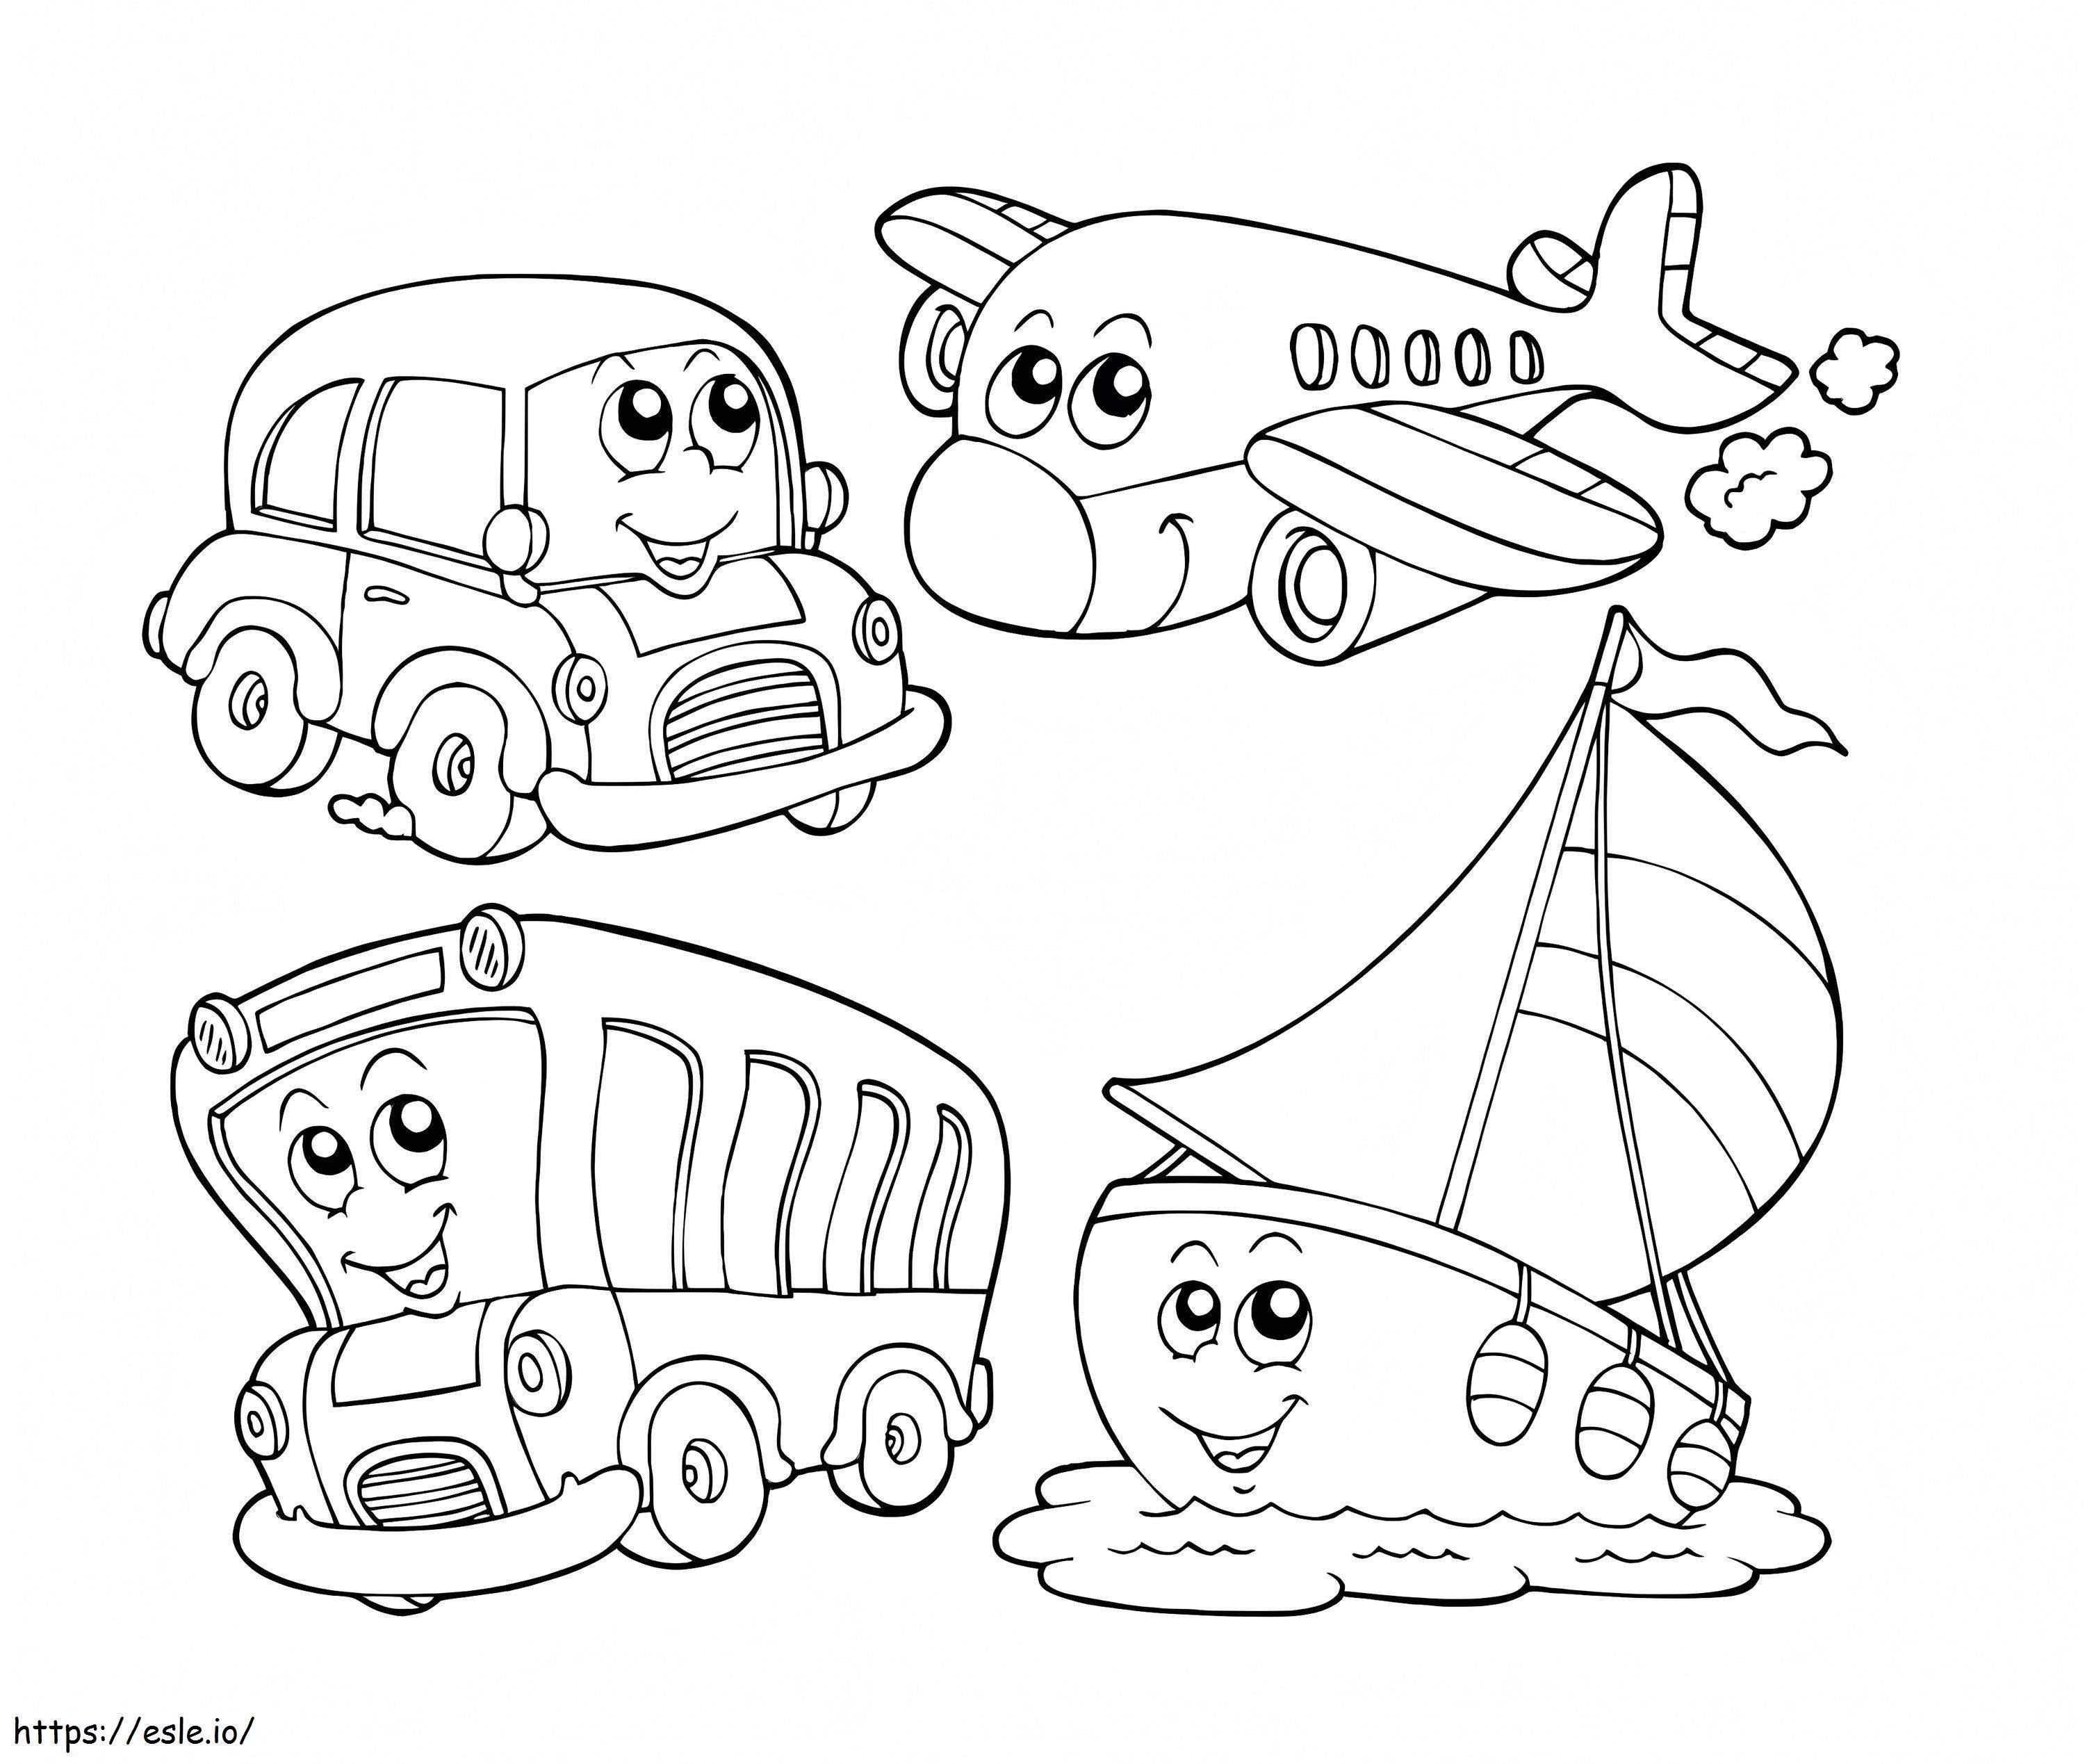 Cartoon Vehicles coloring page